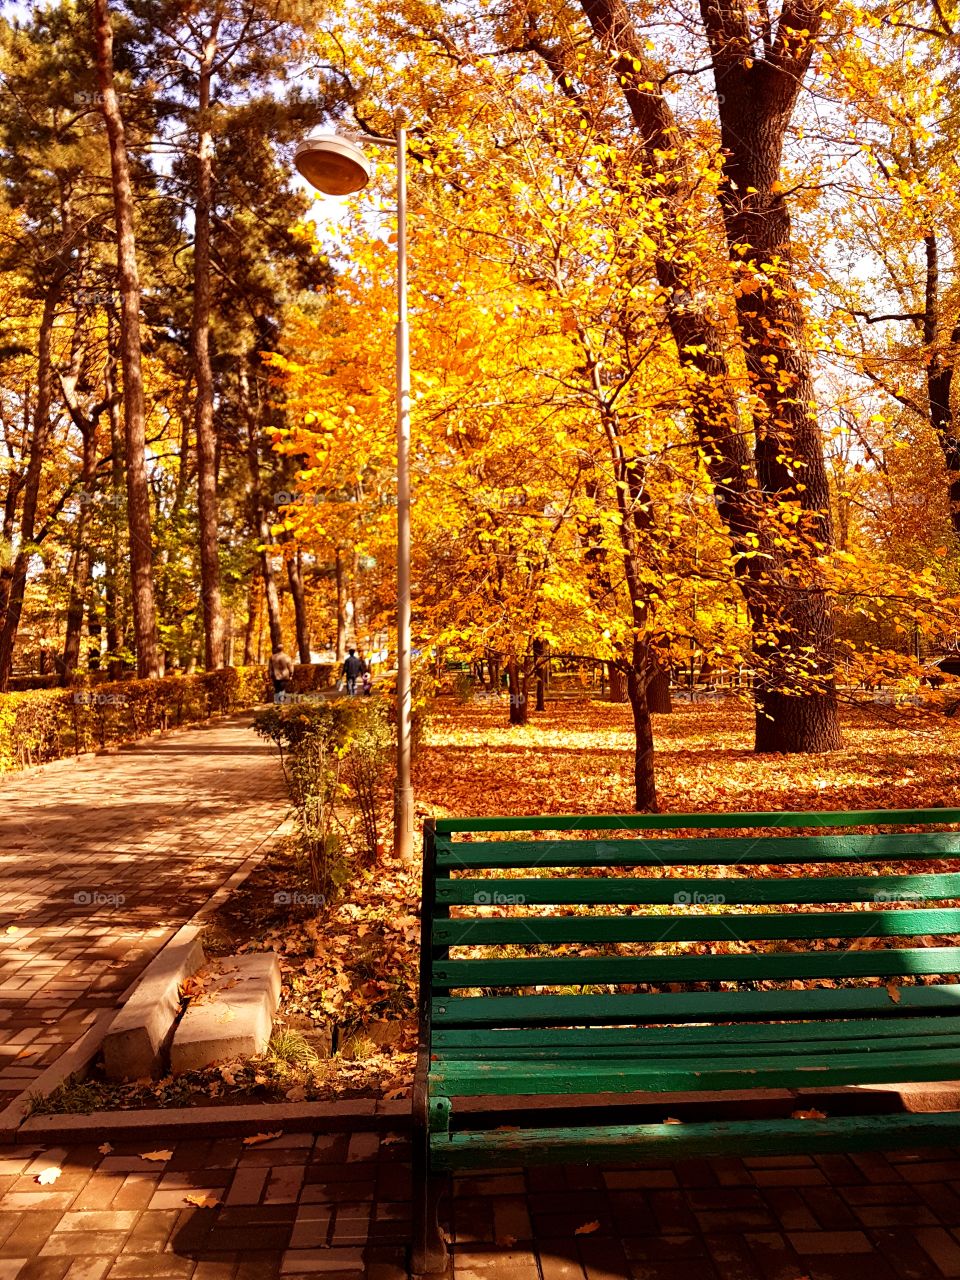 A lonely green bench in a wonderful autumn park